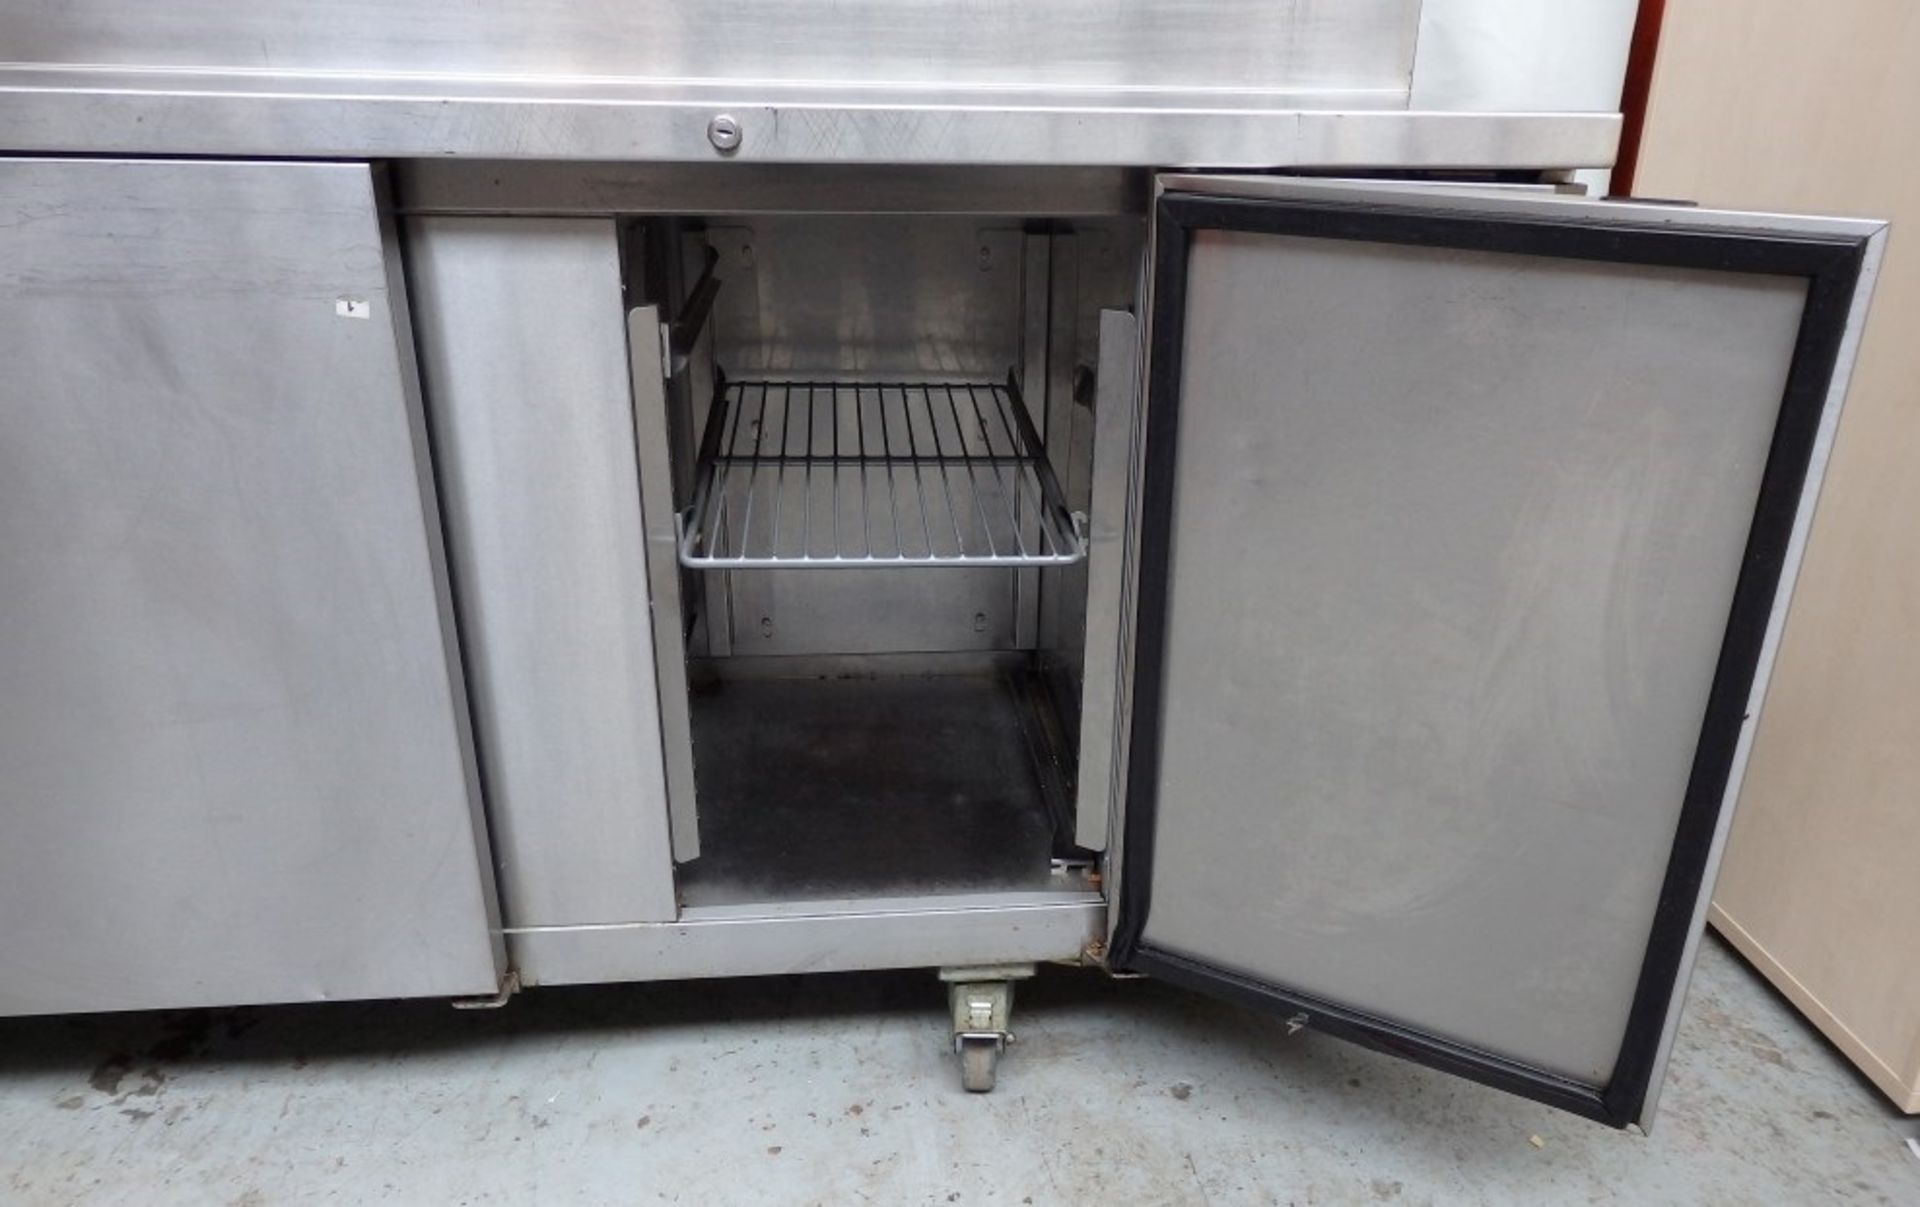 1 x "Precision" Commercial Refrigerator Counter With 3-Door Storage - Model: Gastronorm MCU-311 - - Image 11 of 12